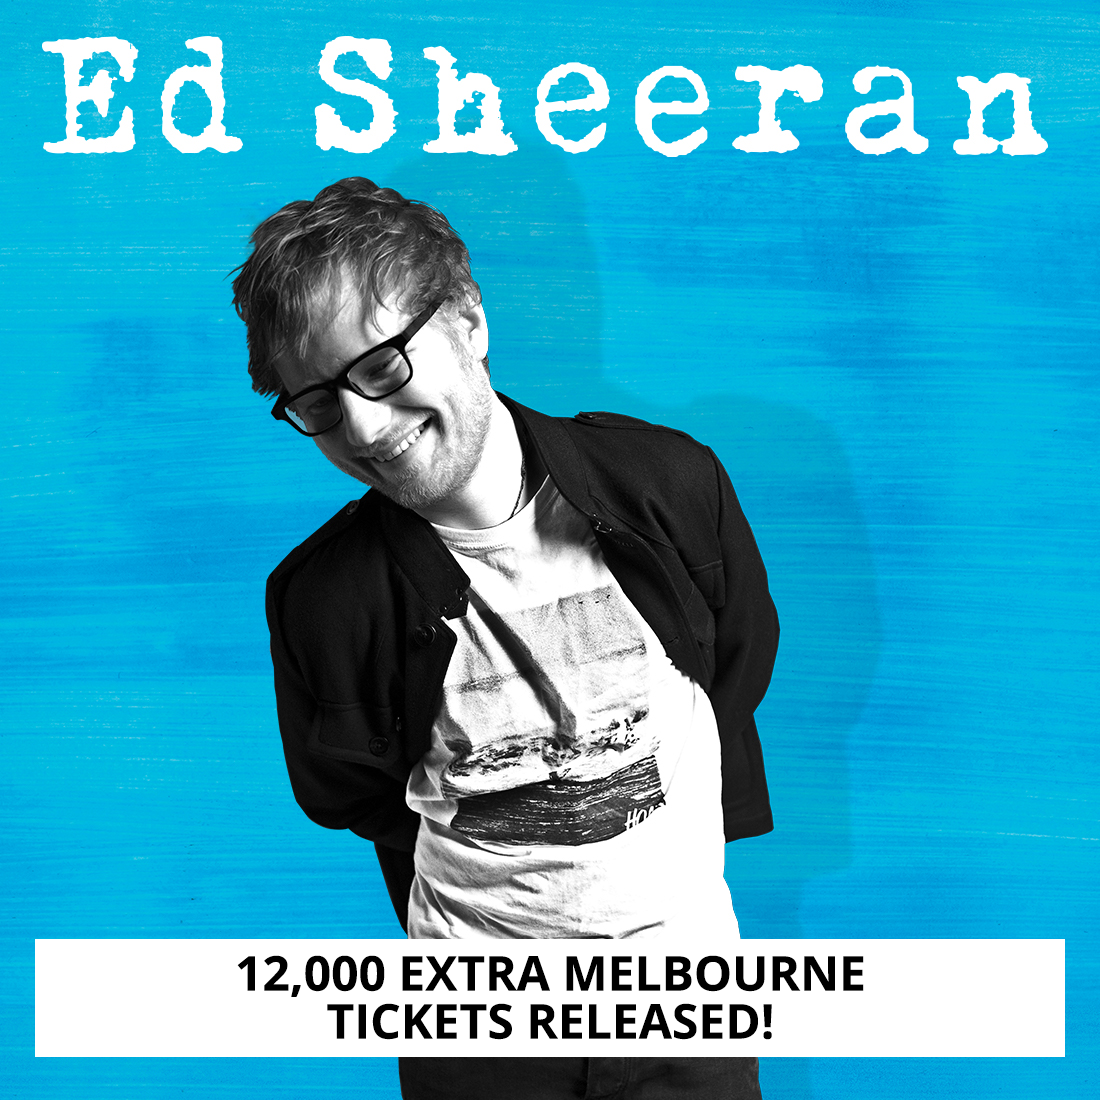 An extra 12,000 tickets for Melbourne